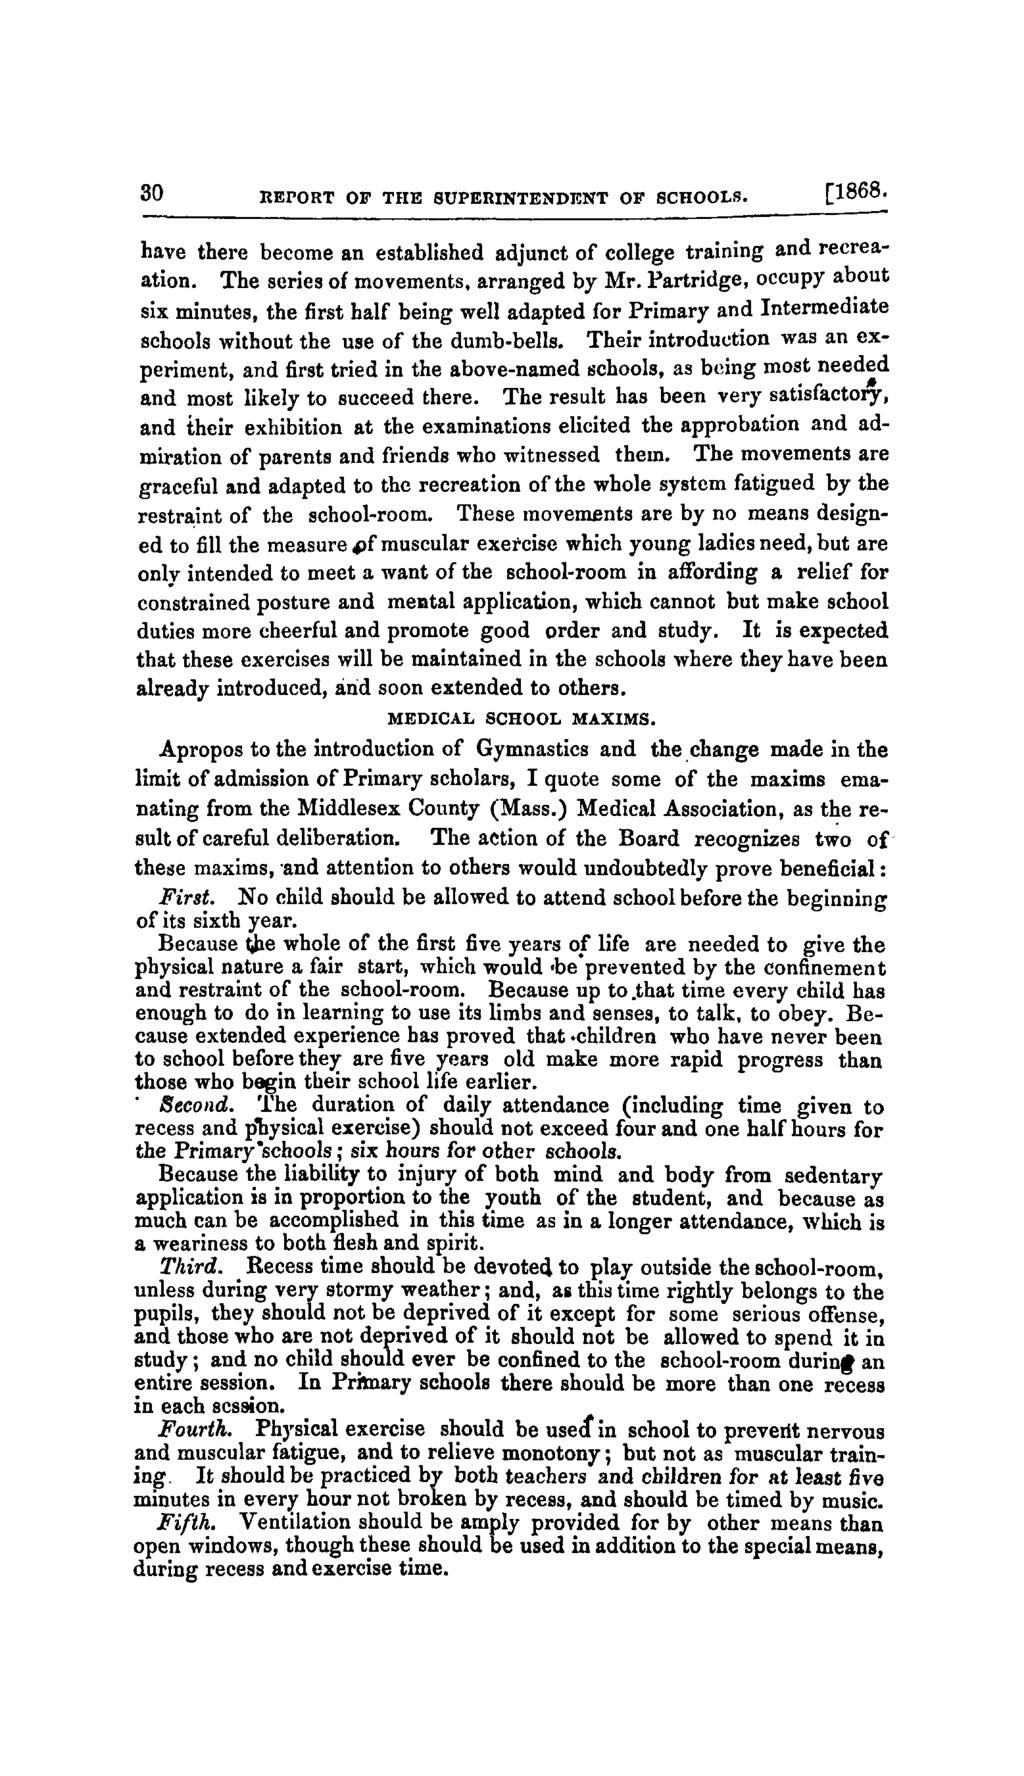 30 RETORT OF THE SUPERINTENDENT OF SCHOOLS. [1868. have there become an established adjunct of college training and recreaation. The series of movements, arranged by Mr.